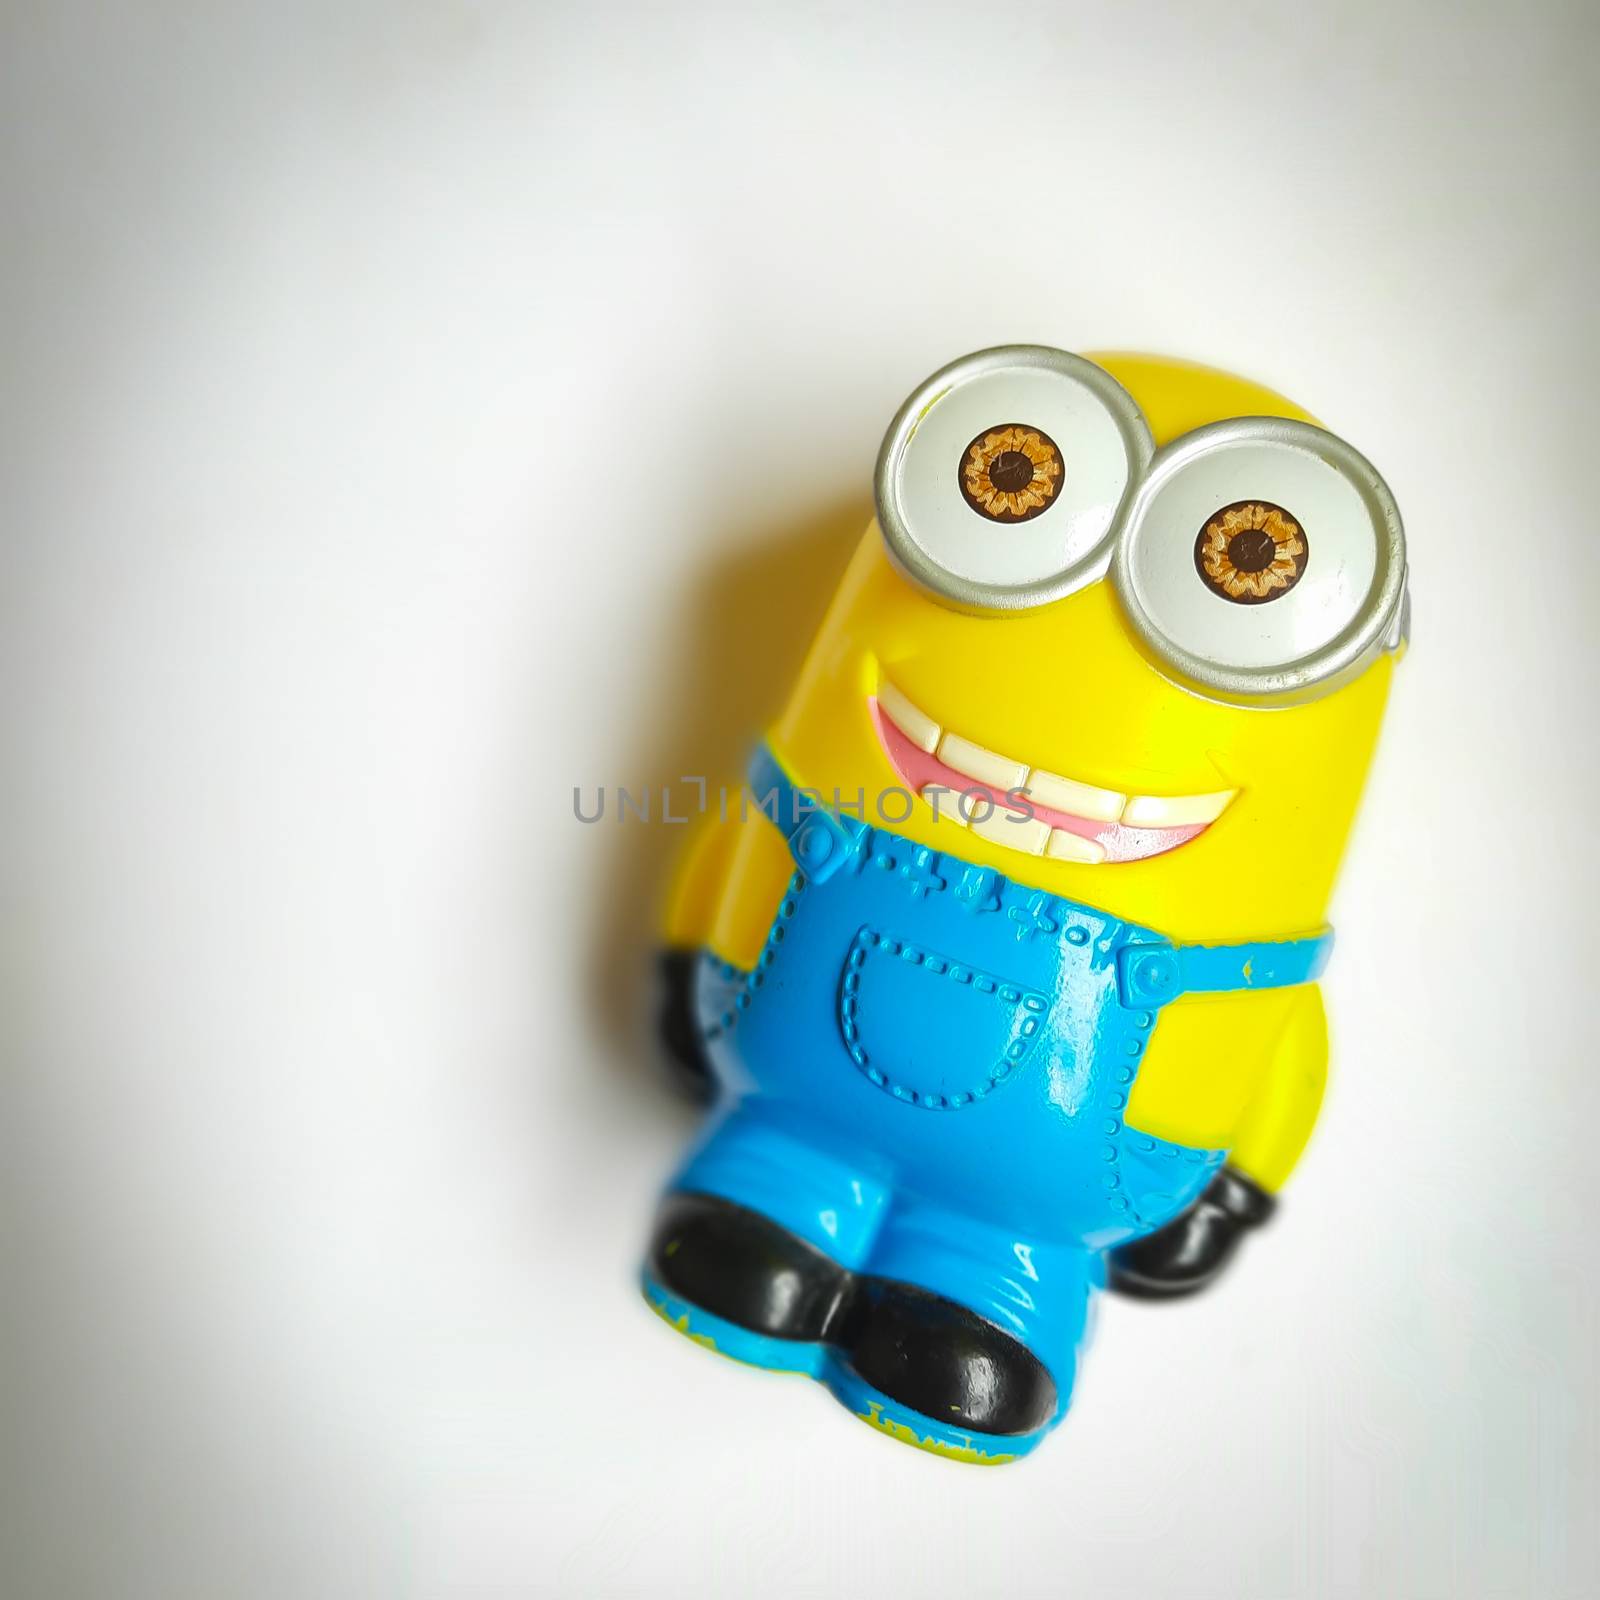 Chennai, India - July 2 2020: Minion toy shape piggy bank placed in white background